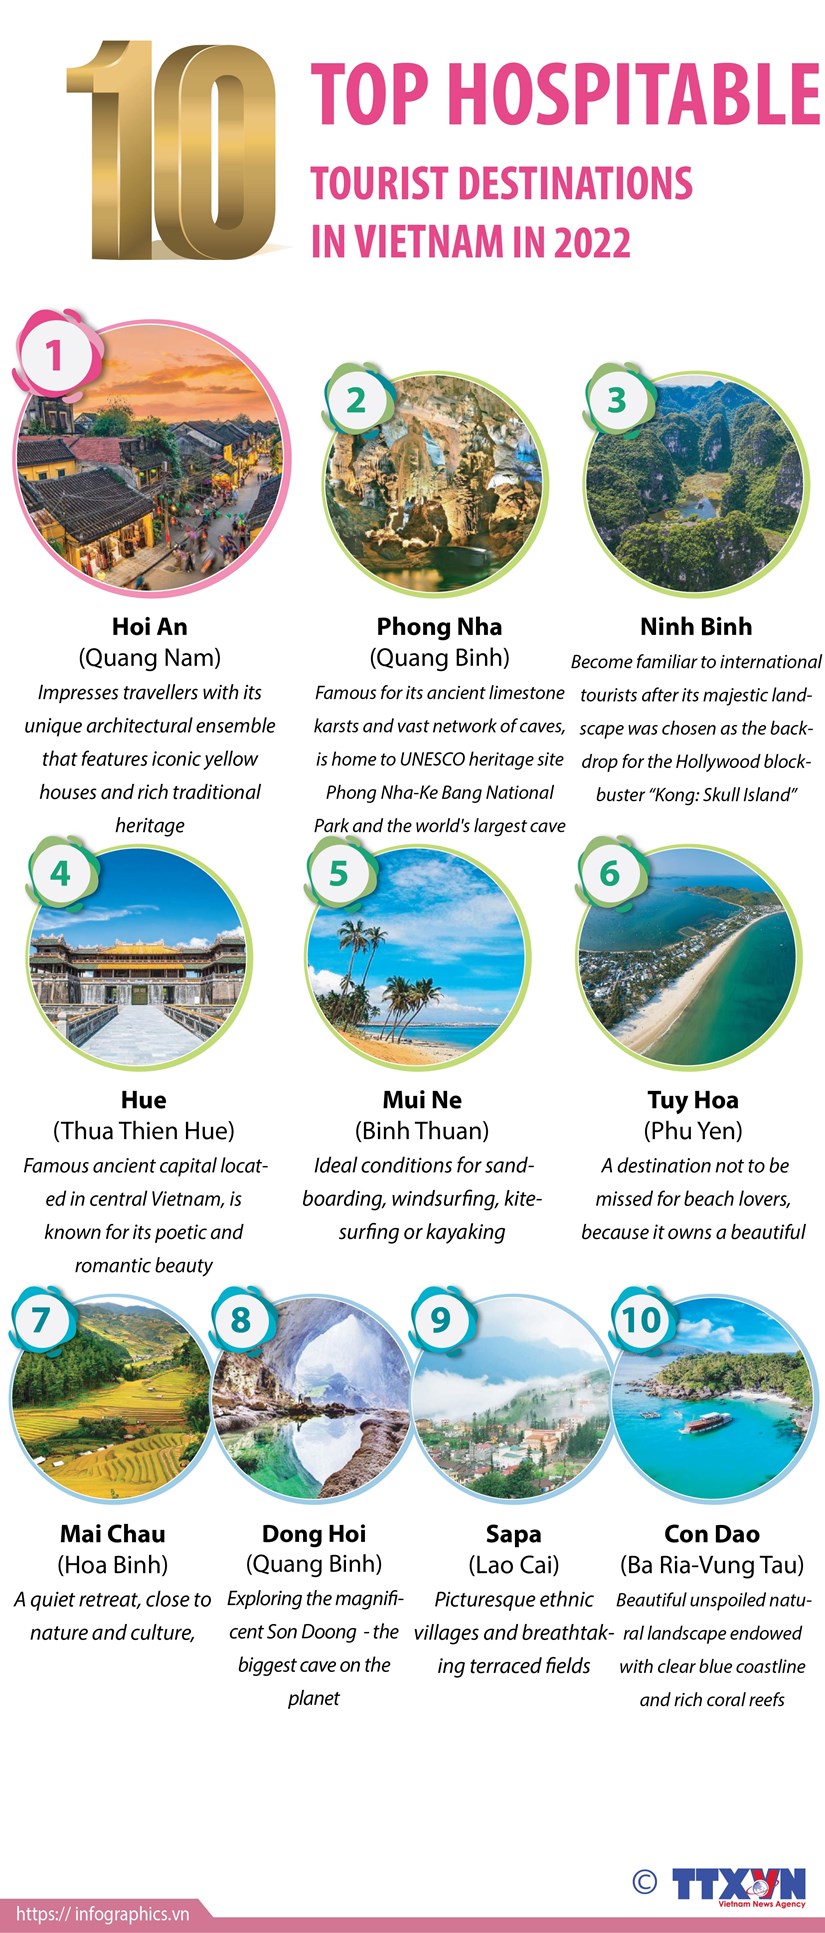 Top 10 hospitable tourist destinations in Vietnam in 2022 hinh anh 1